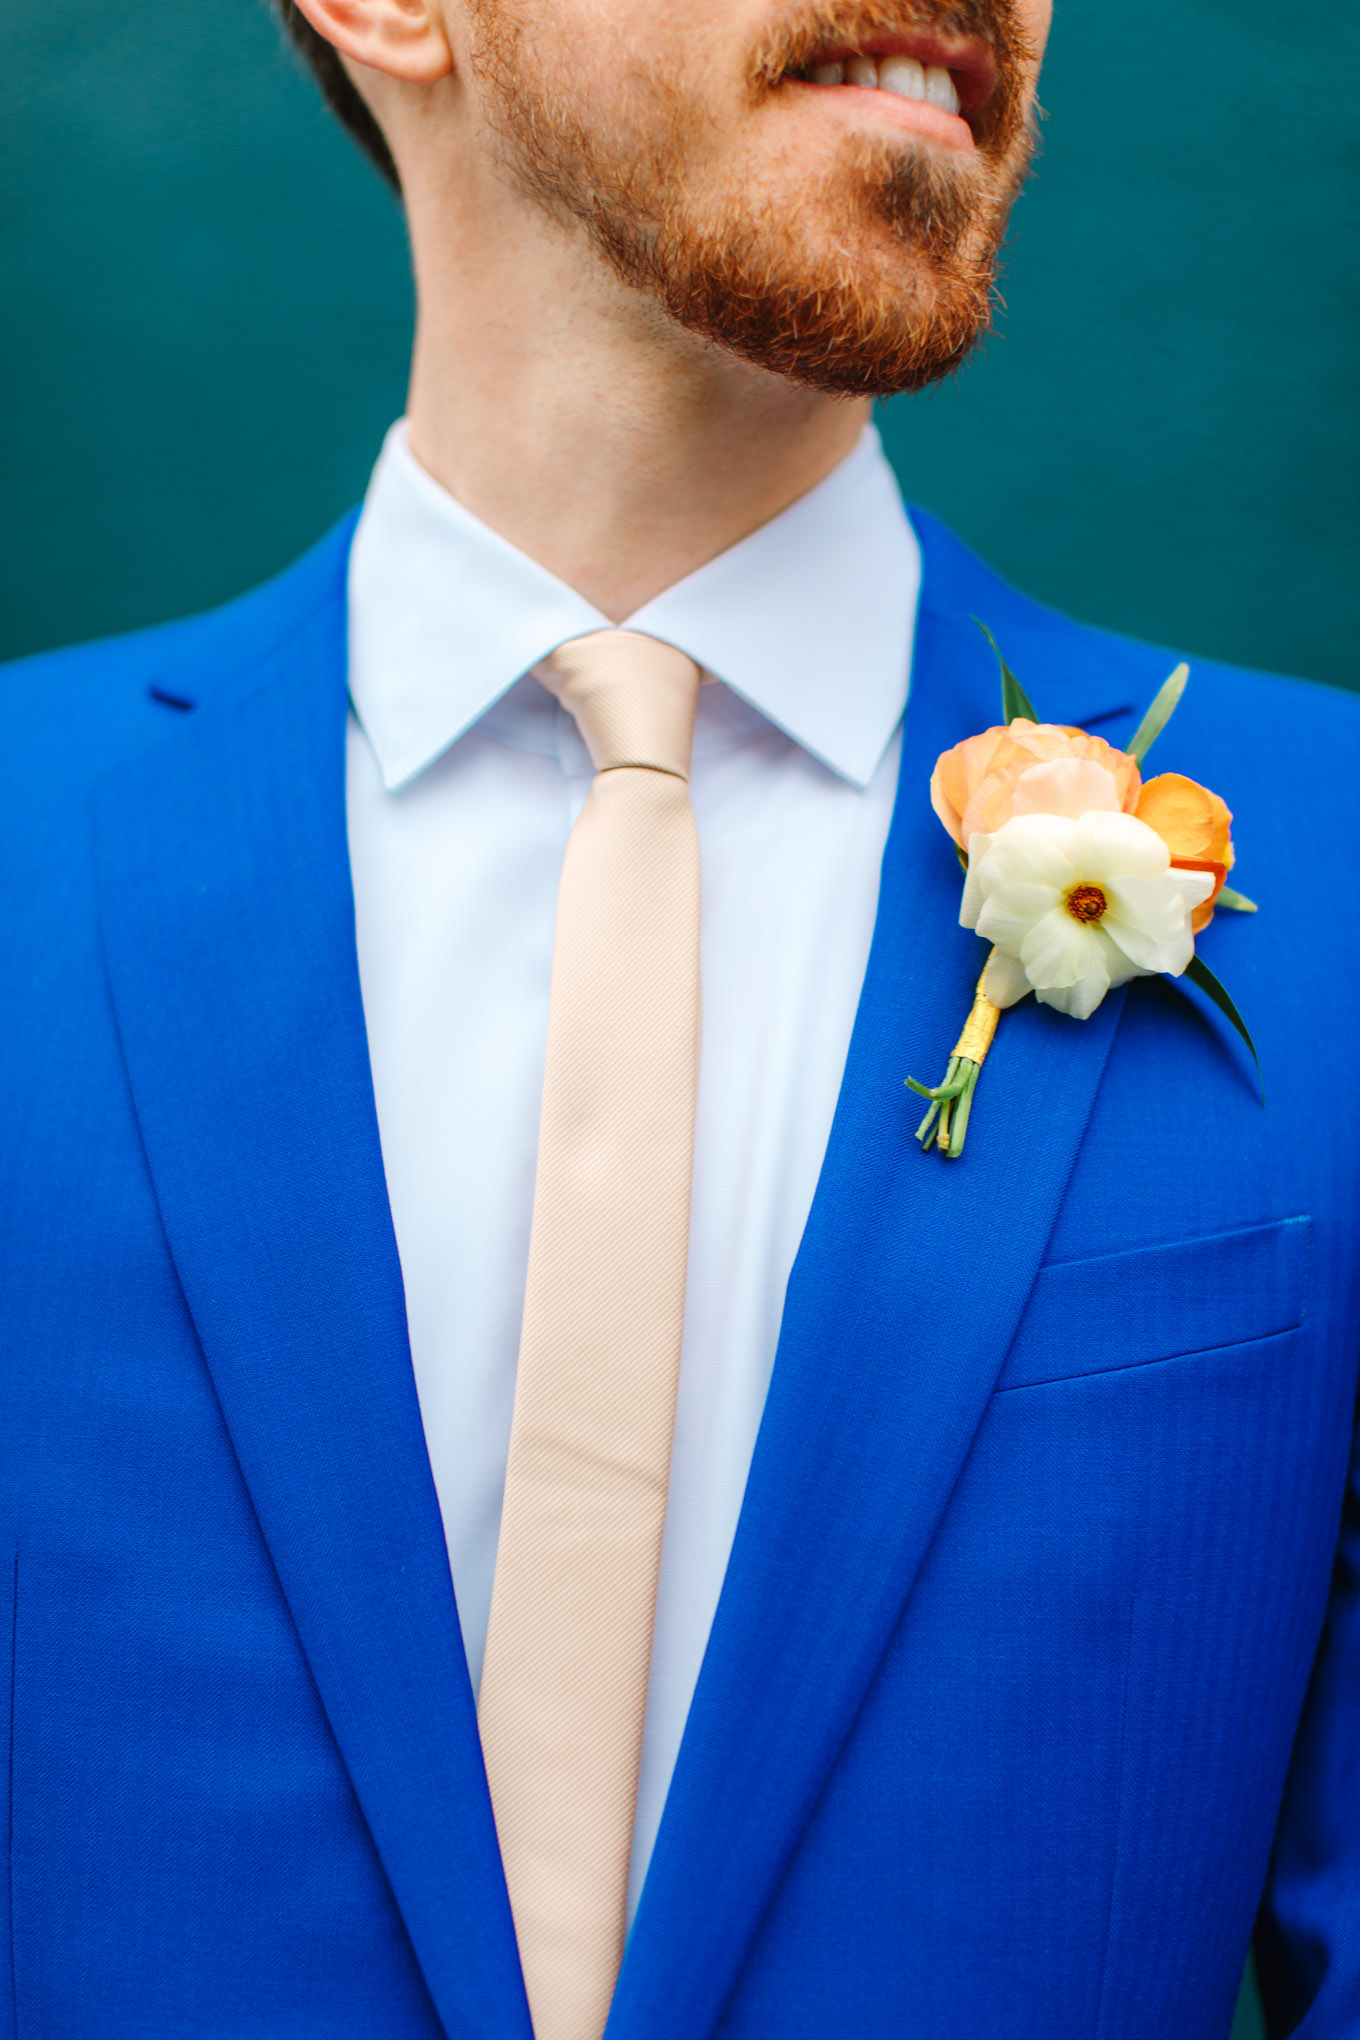 Groom in bright blue suit with ivory tie and orange boutonniere | TV inspired wedding at The Fig House Los Angeles | Published on The Knot | Fresh and colorful photography for fun-loving couples in Southern California | #losangeleswedding #TVwedding #colorfulwedding #theknot   Source: Mary Costa Photography | Los Angeles wedding photographer